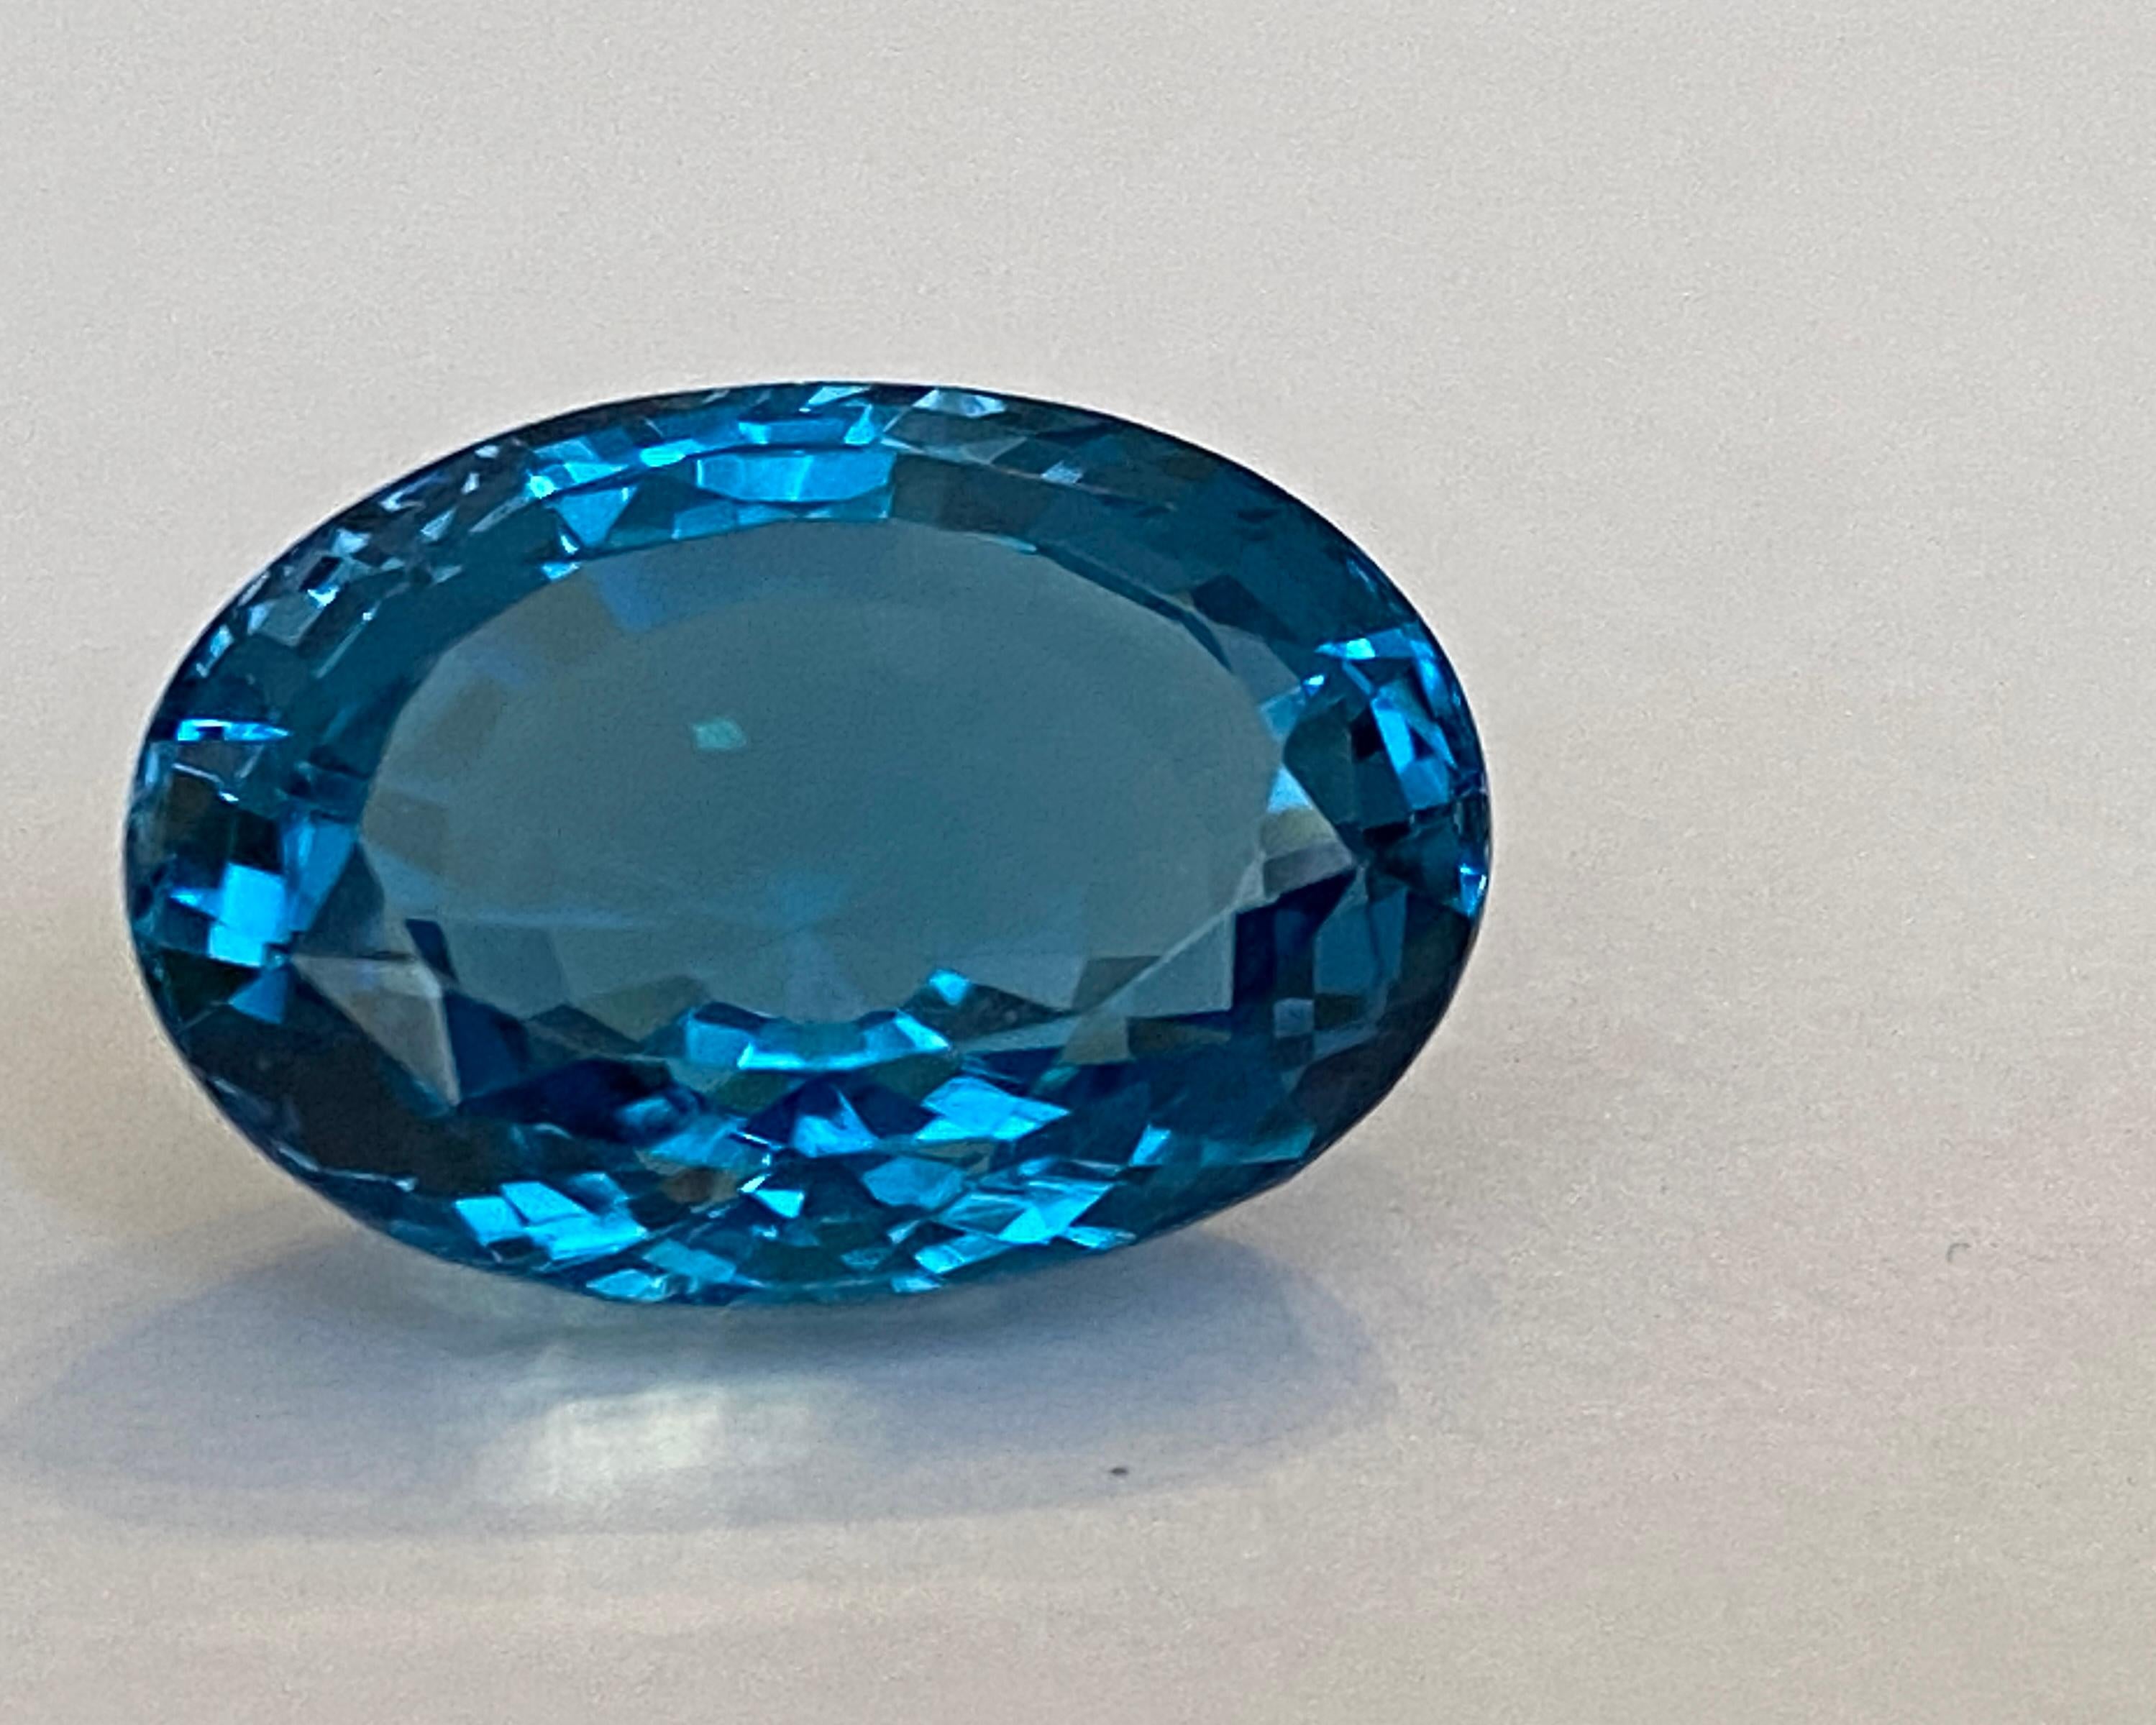  Offered  Oval Mixed cut Natural Gemstone Flawless London Blue Topaz 21.23 ct.
It's 'AAA' Quality & Loop Clean Gemstone. Transparent.   Ideal for ring of  pendant!
Dimensions:13.08mm*18.35mm*14.59mm
Origin : Brazil
Treatment: heated
London Blue